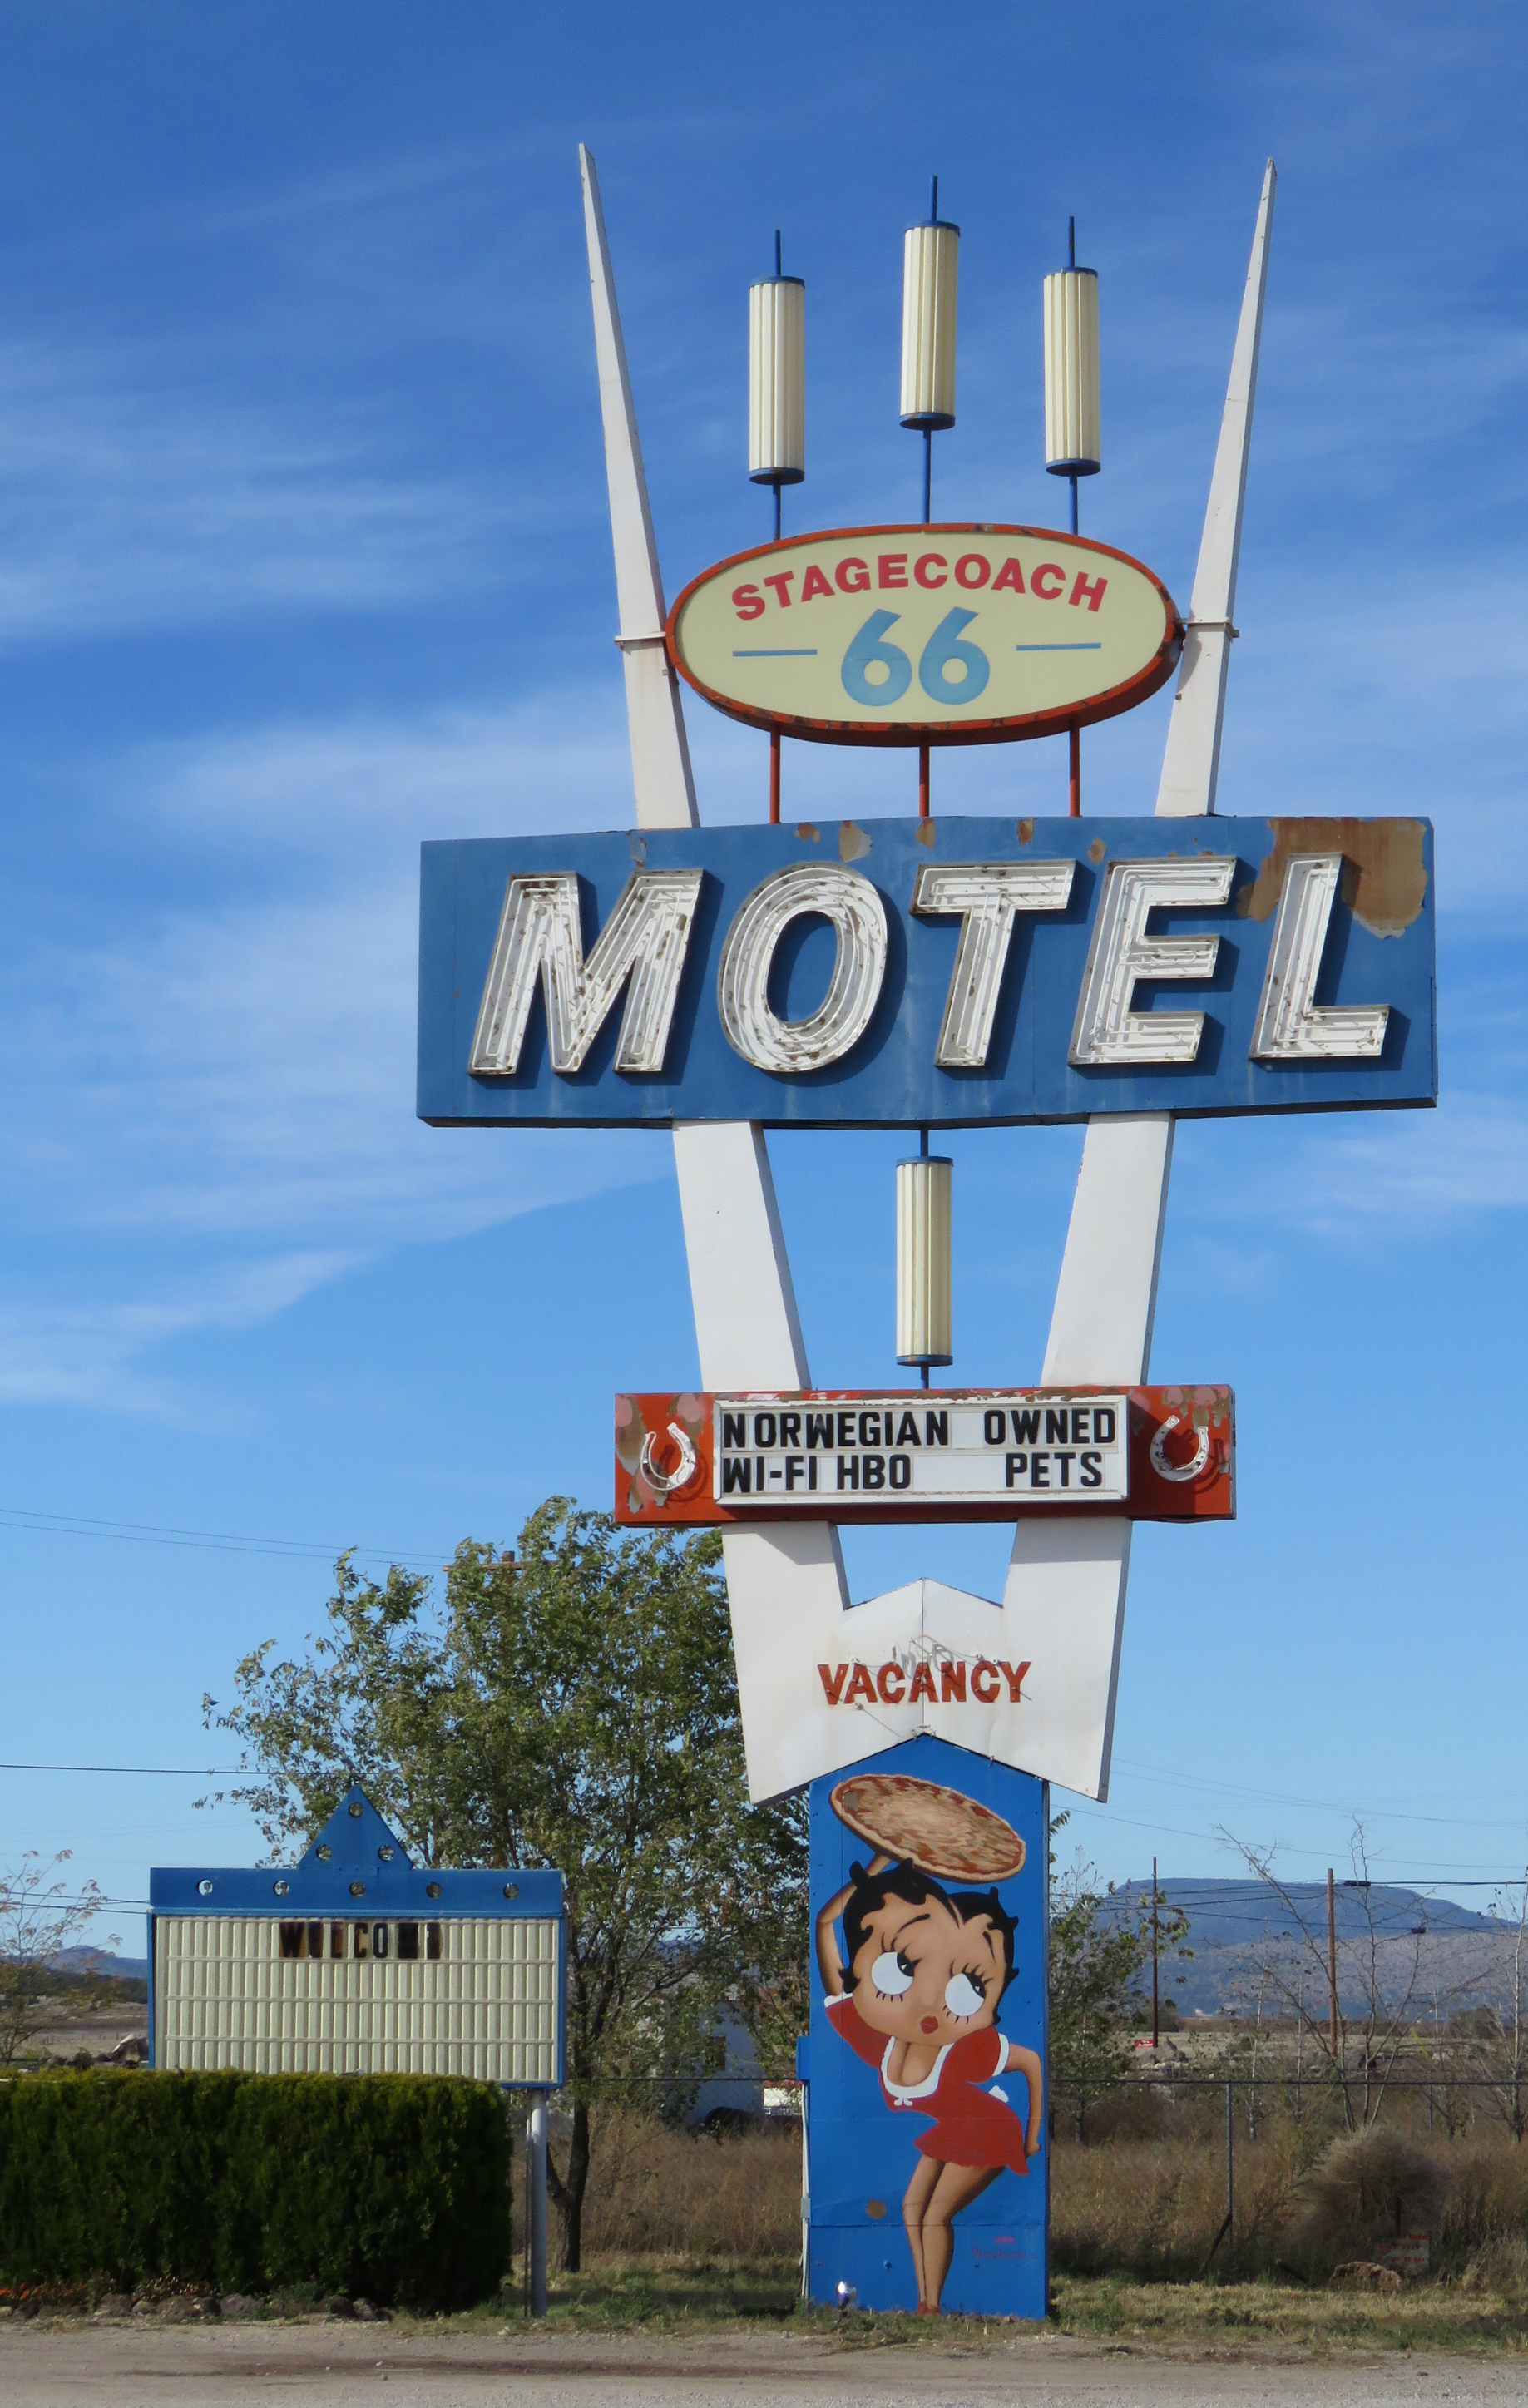 Stagecoach 66 Motel and The Pizza Joint - 639 Chino Street, Seligman, Arizona U.S.A. - November 9, 2015